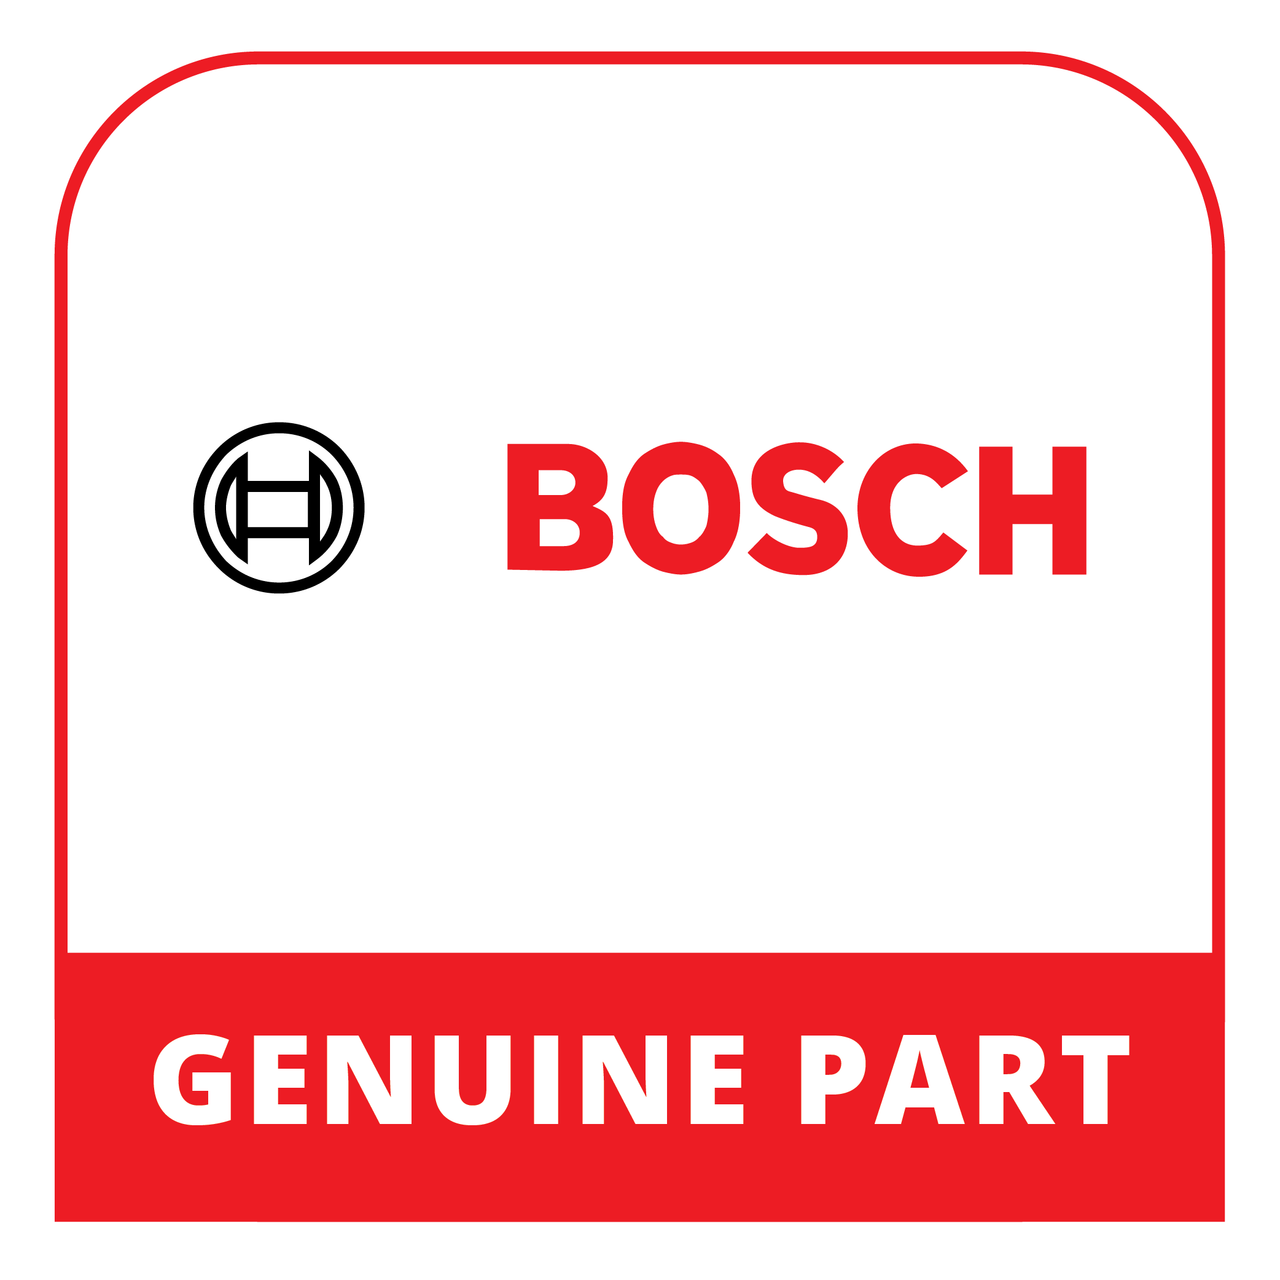 Bosch (Thermador) 20004151 - Case-Rear Part - Genuine Bosch (Thermador) Part